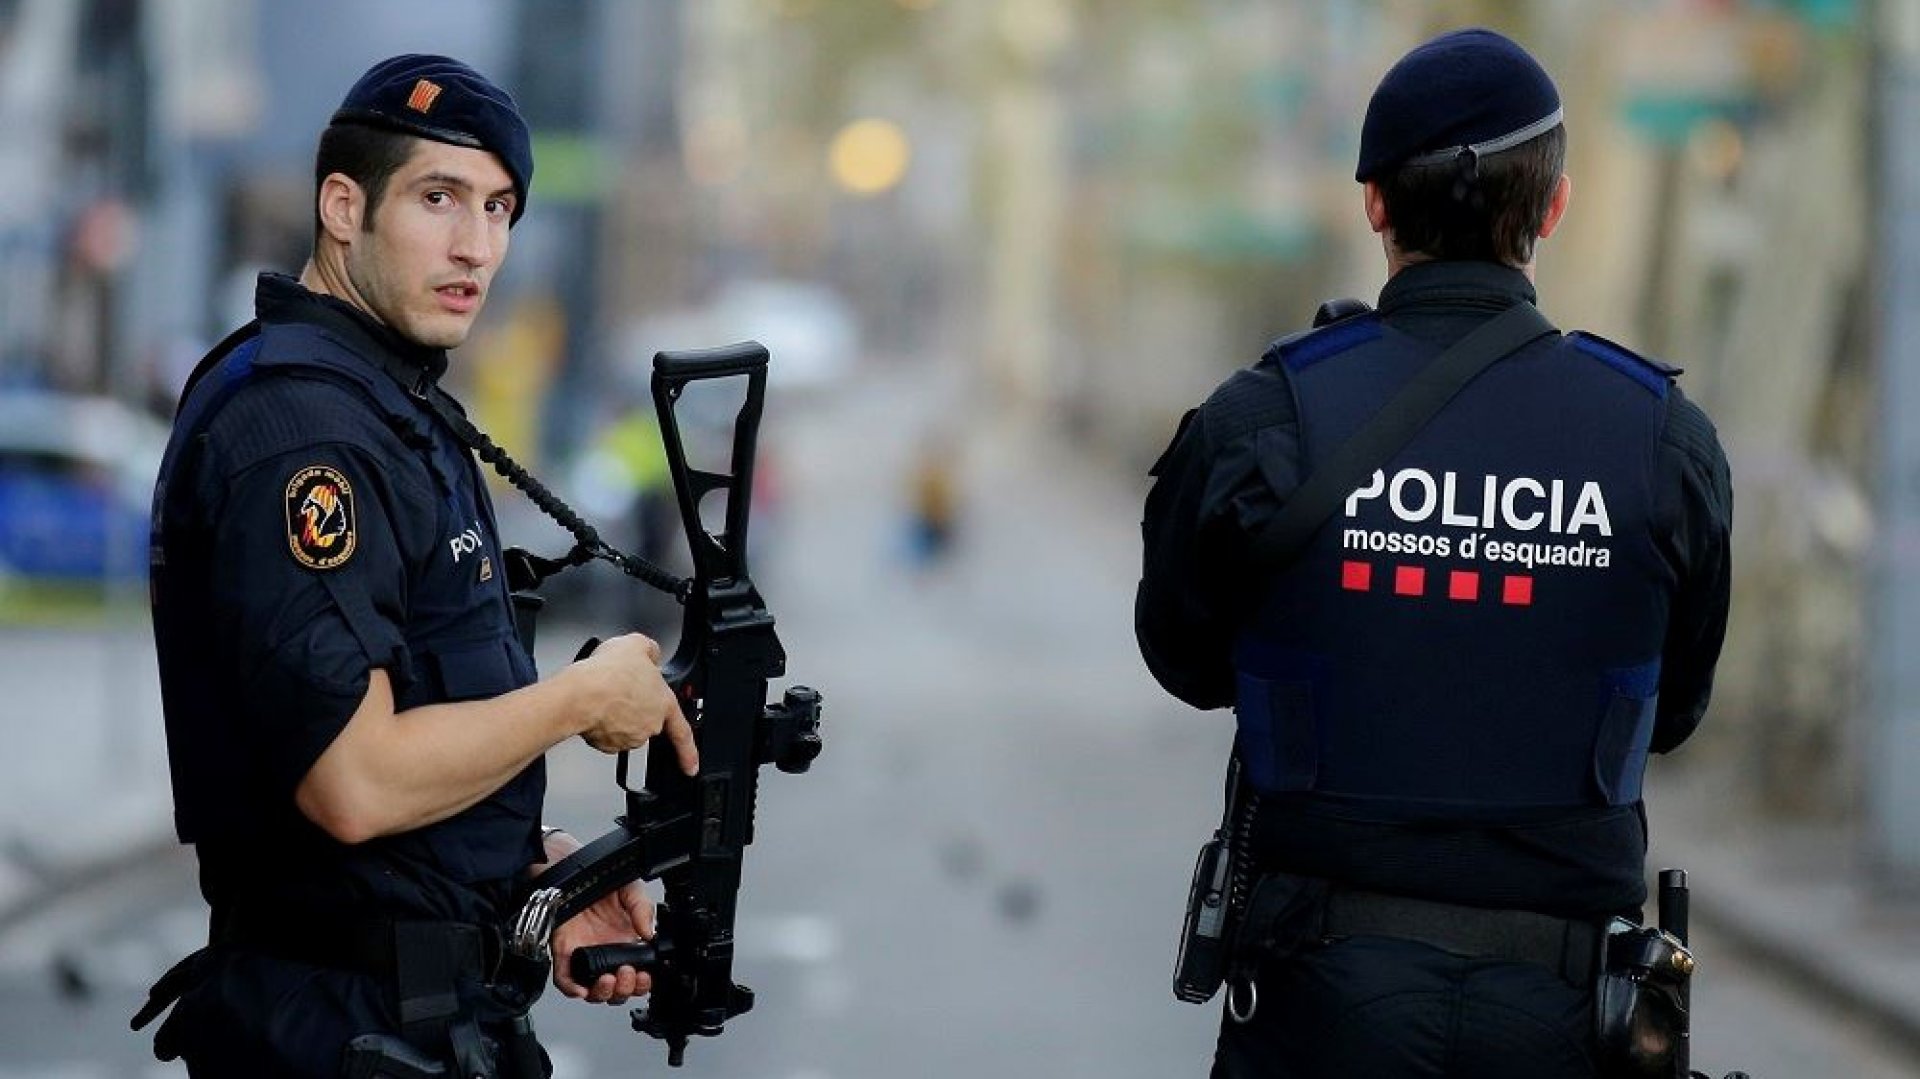 Counter terrorismـ  A Moroccan man was arrested in Barcelona